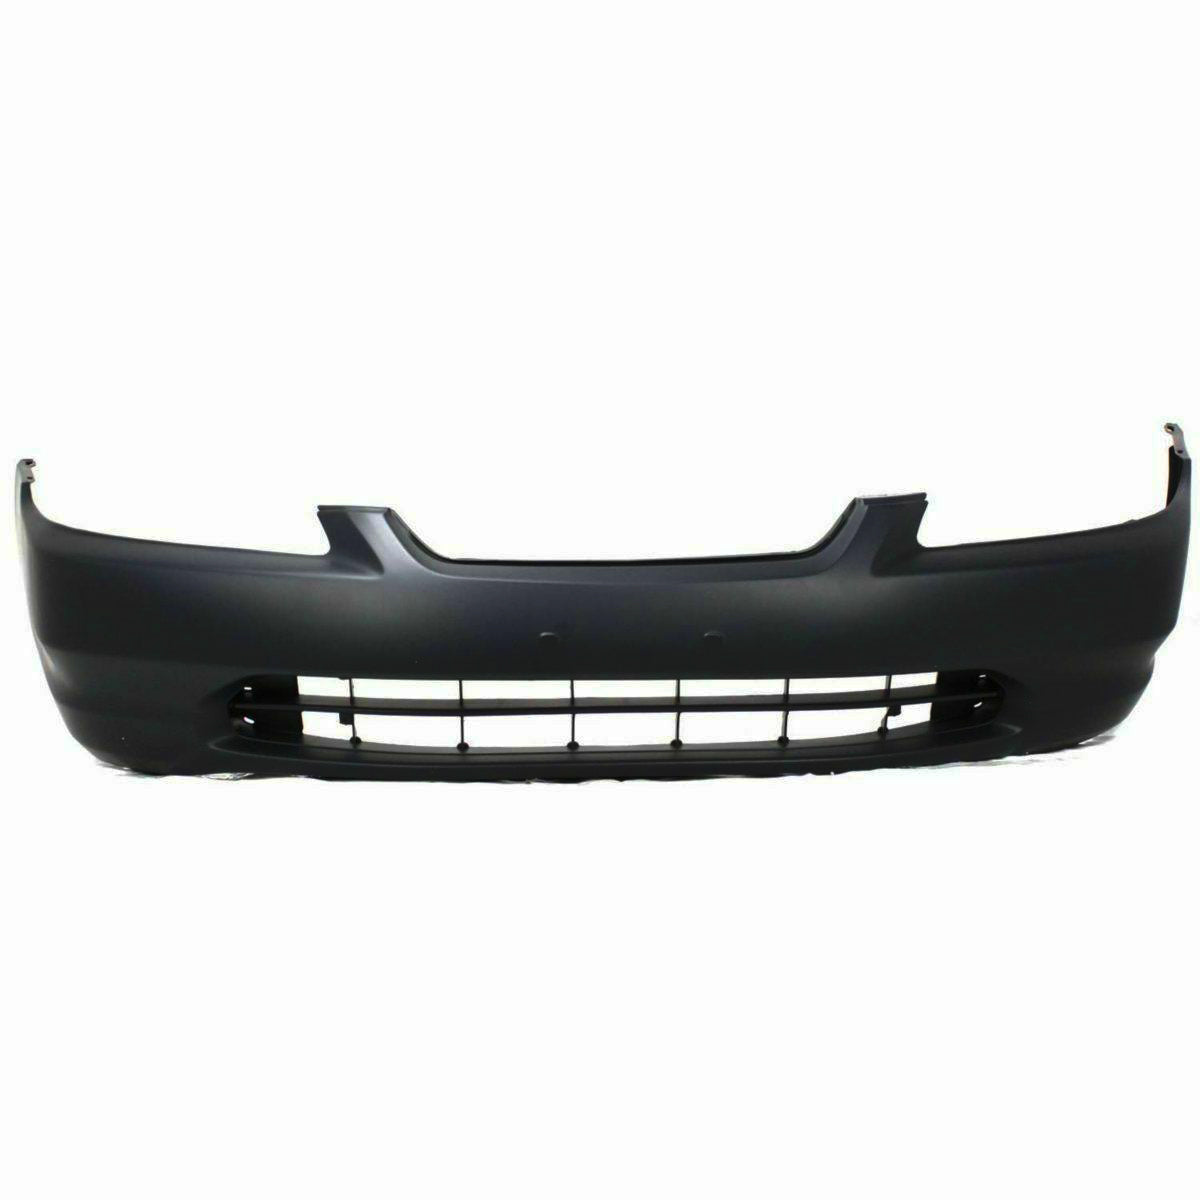 1998-2000 Honda Accord Coupe Front Bumper Painted